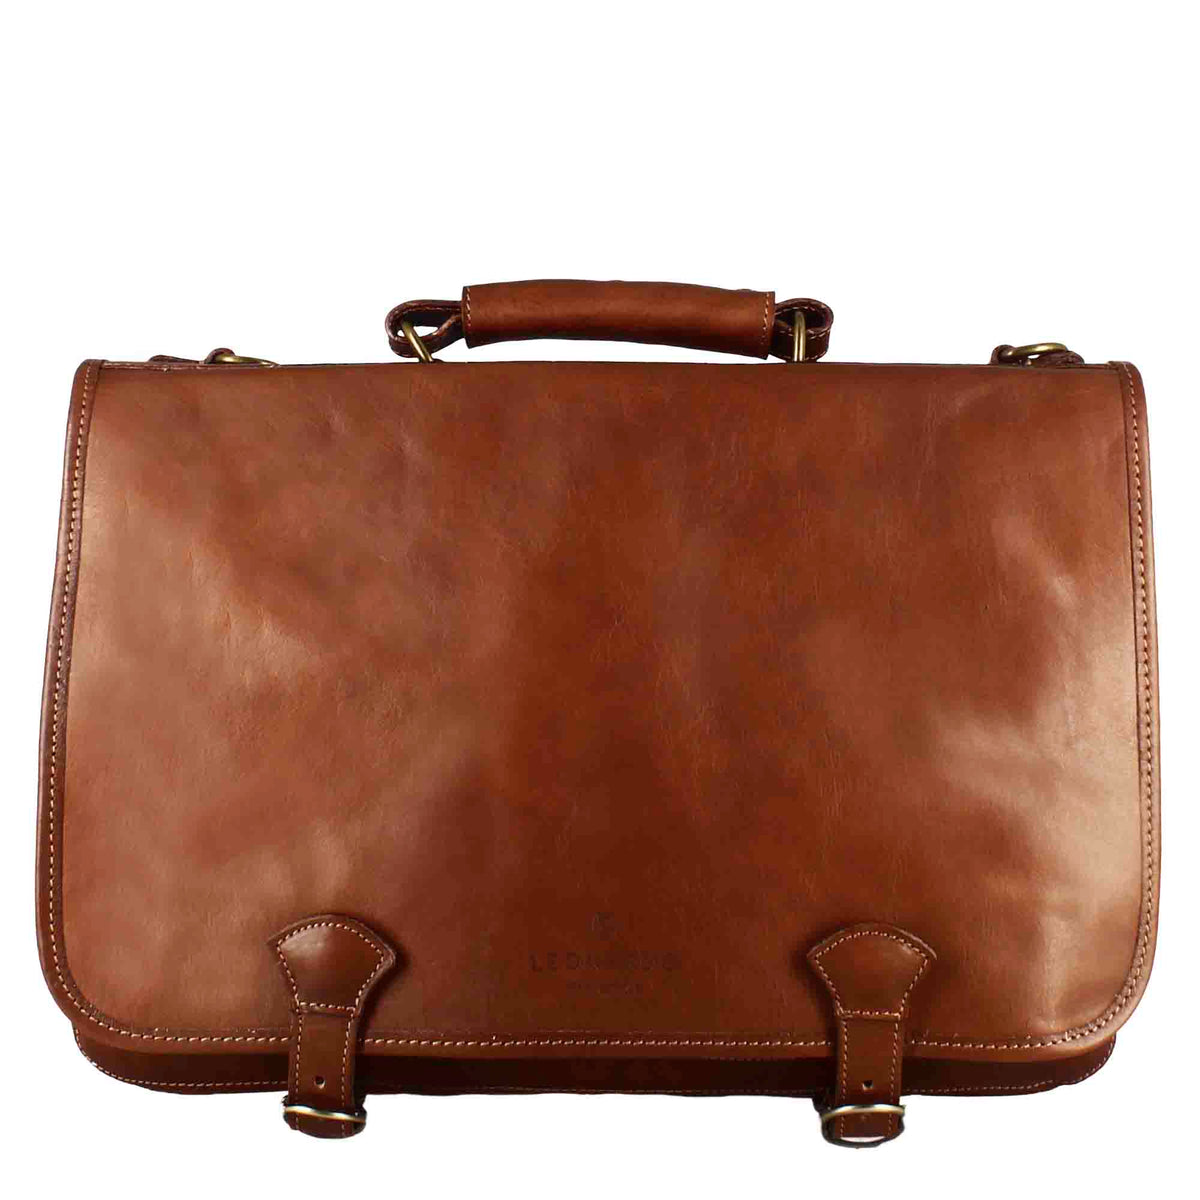 Professional briefcase in full-grain leather flap closure with double buckle dark brown colour